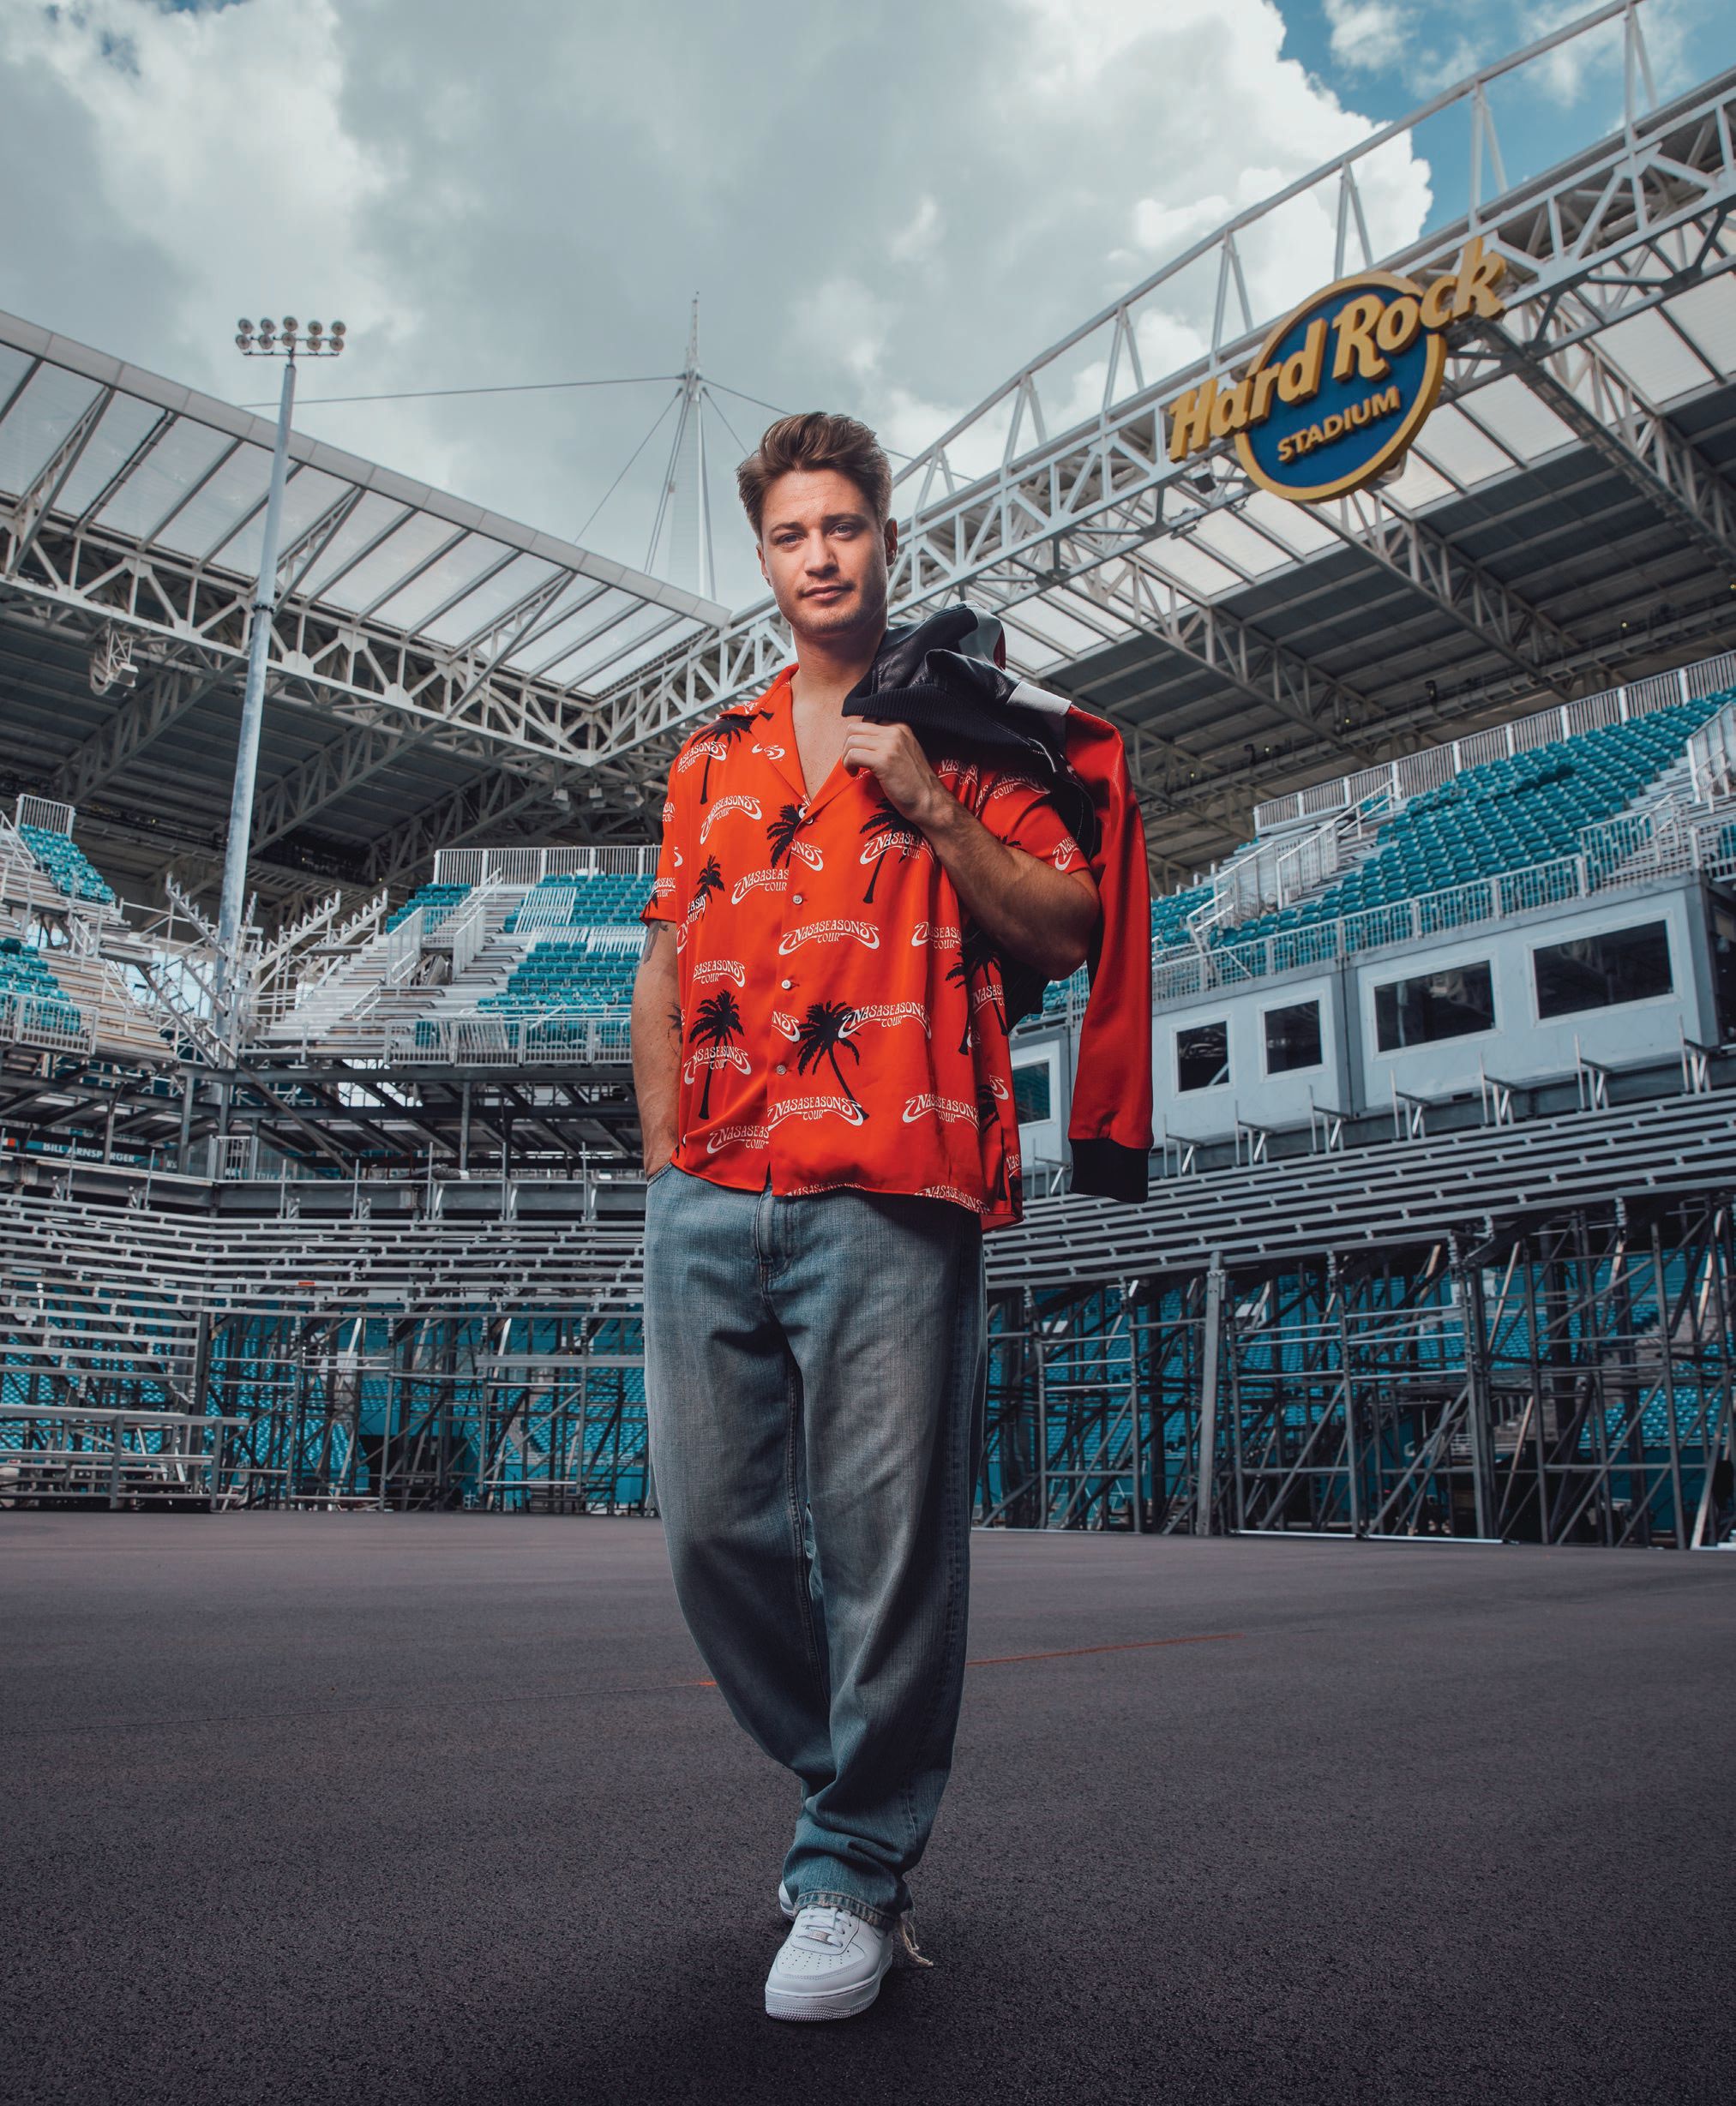 Nasaseasons shirt and jacket, Balenciaga jeans, Nike AF1 sneakers, thewebster.com. PHOTOGRAPHED BY JOHANNES LOVUND | STYLED BY MANUELA GUTIERREZ
GROOMING BY CESAR FERRETTE USING DIOR BEAUTY | SHOT ON SITE AT HARD ROCK STADIUM